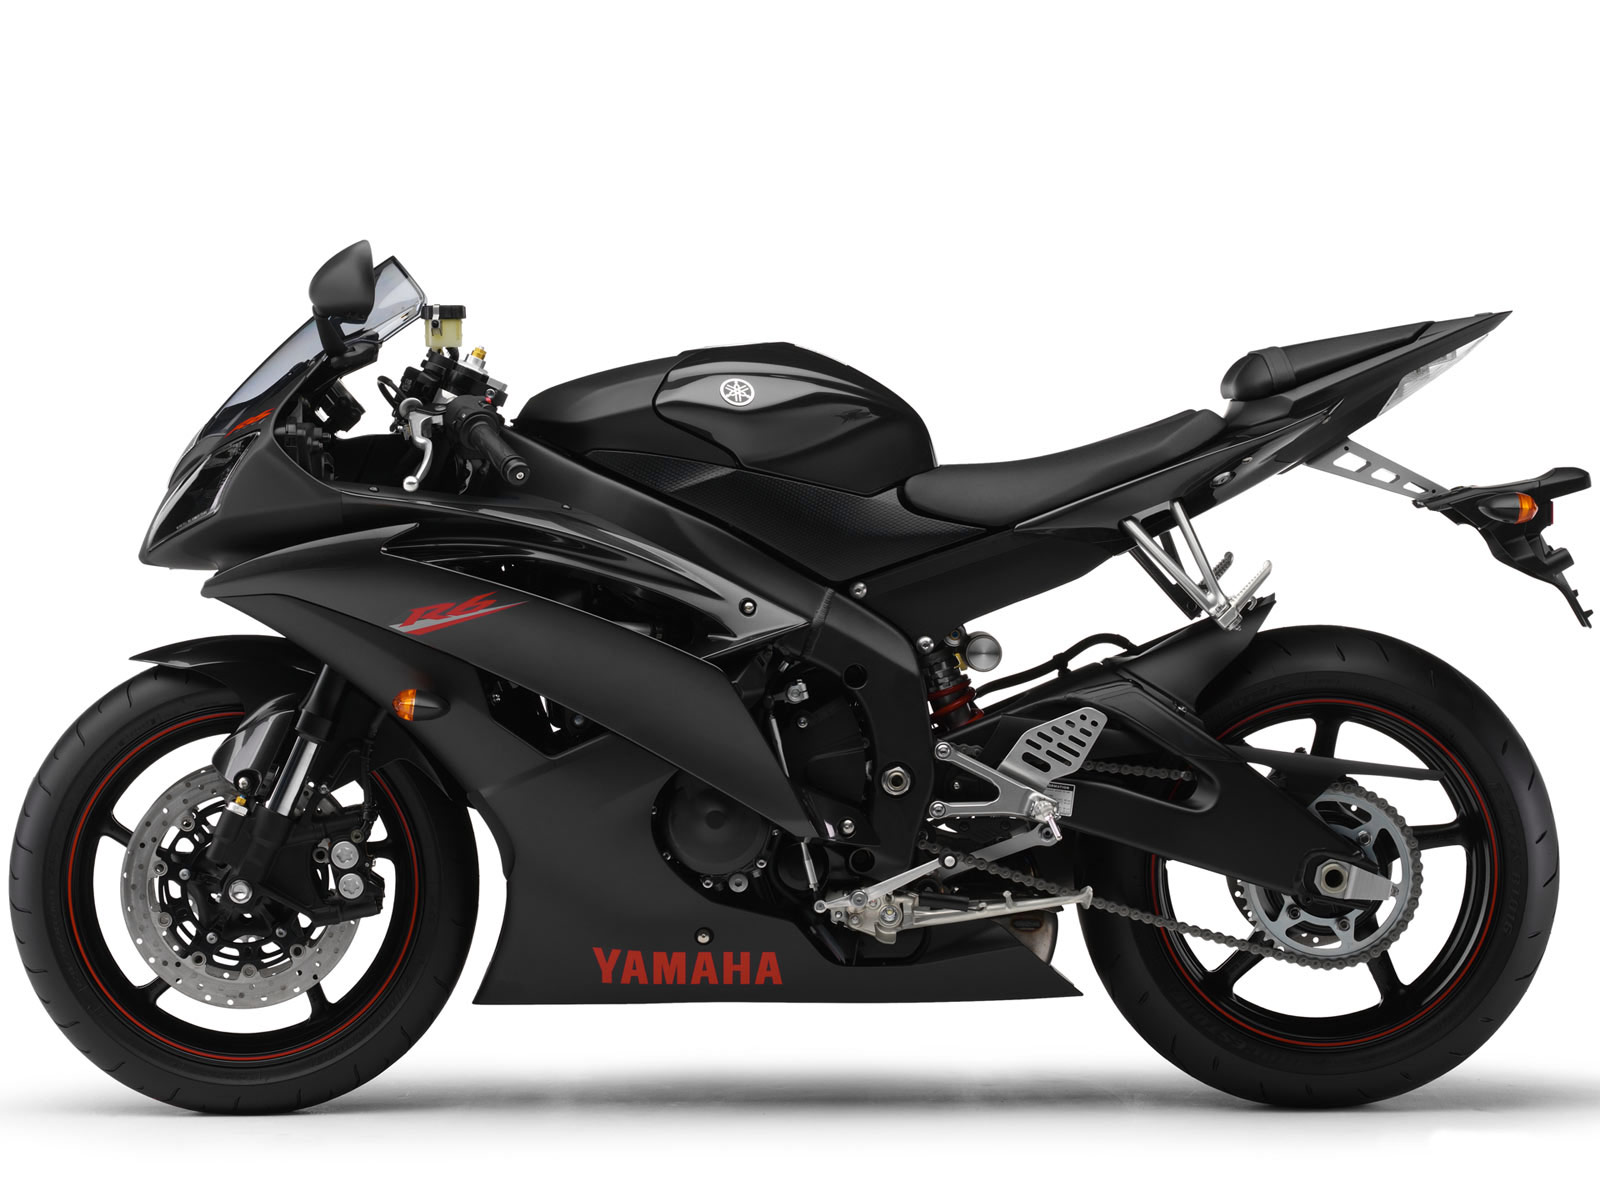 YZF-R6 Motorcycle pictures, review and specifications 2008 Yamaha